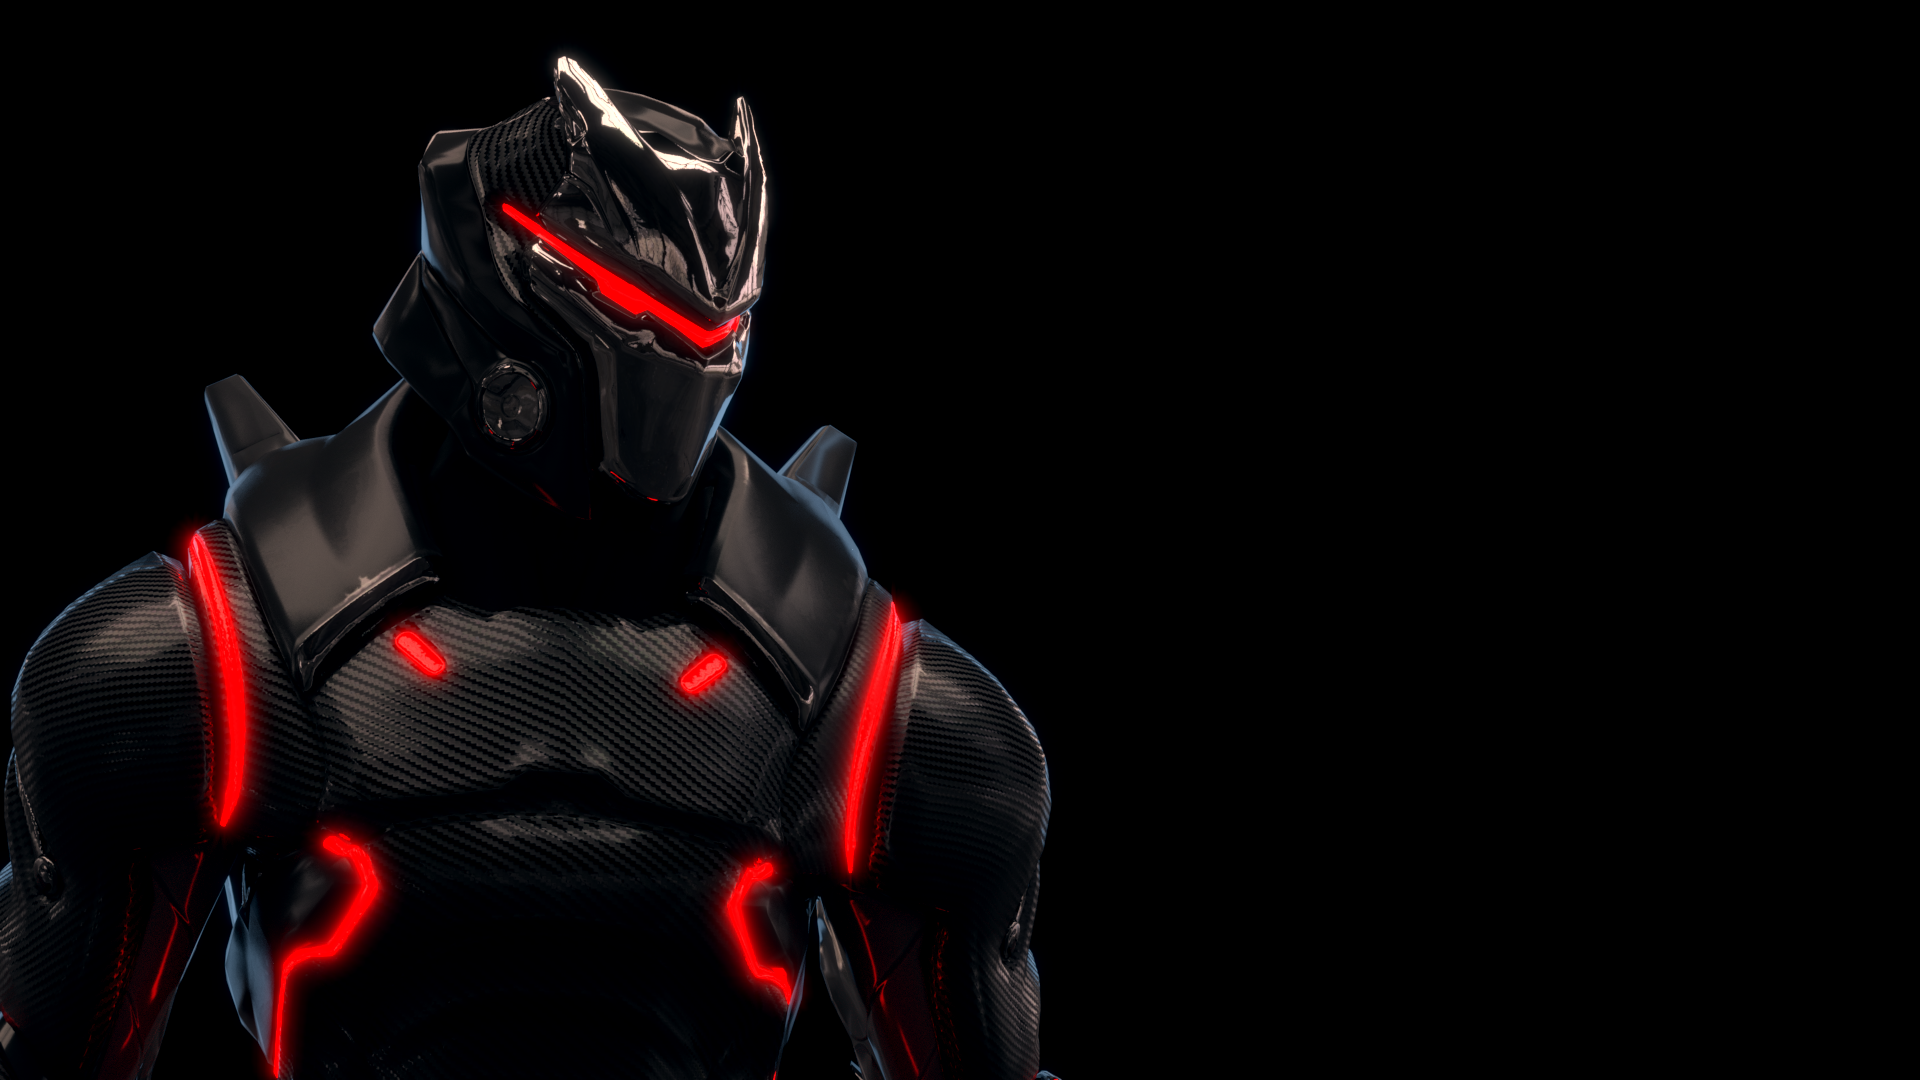 Made A Wallpaper With The Omega Fortnitebr